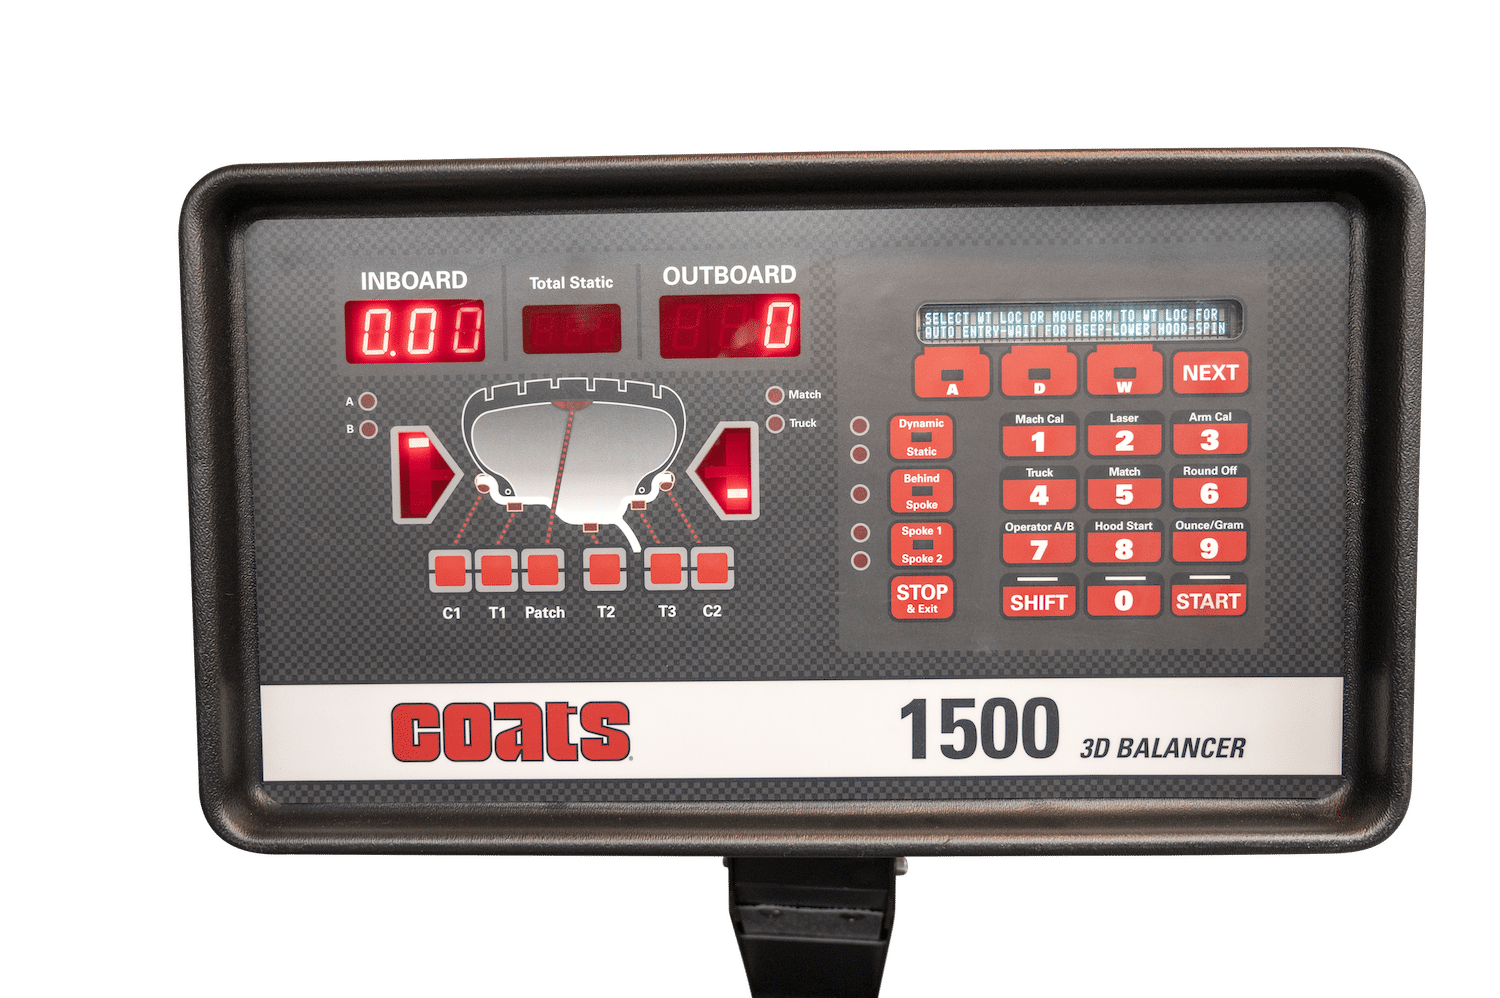 The capacitive touch screen buttons of the 1500 wheel balancer